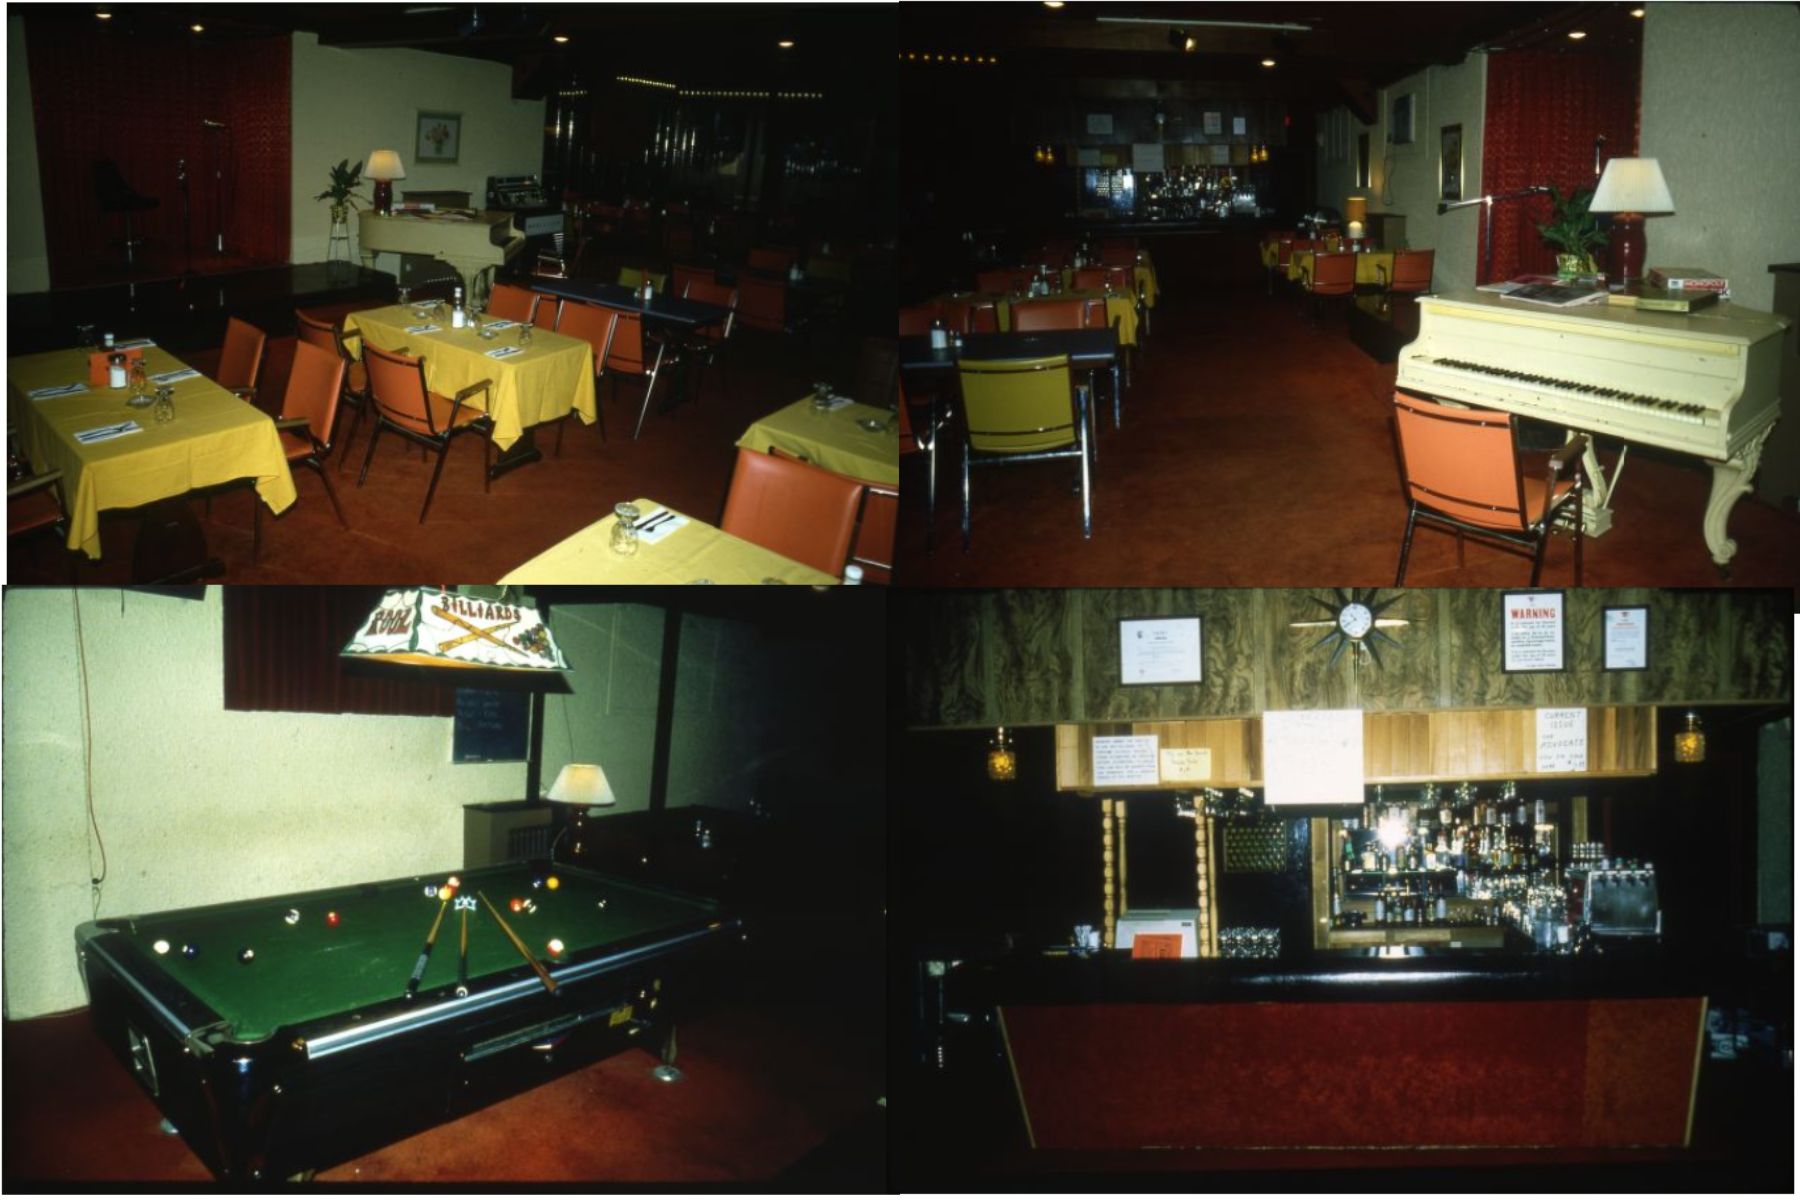 Four film photos of the interior of Giovanni's Room. The top two photos show tables and chairs and a piano. The bottom two photos show the bar and a pool table.